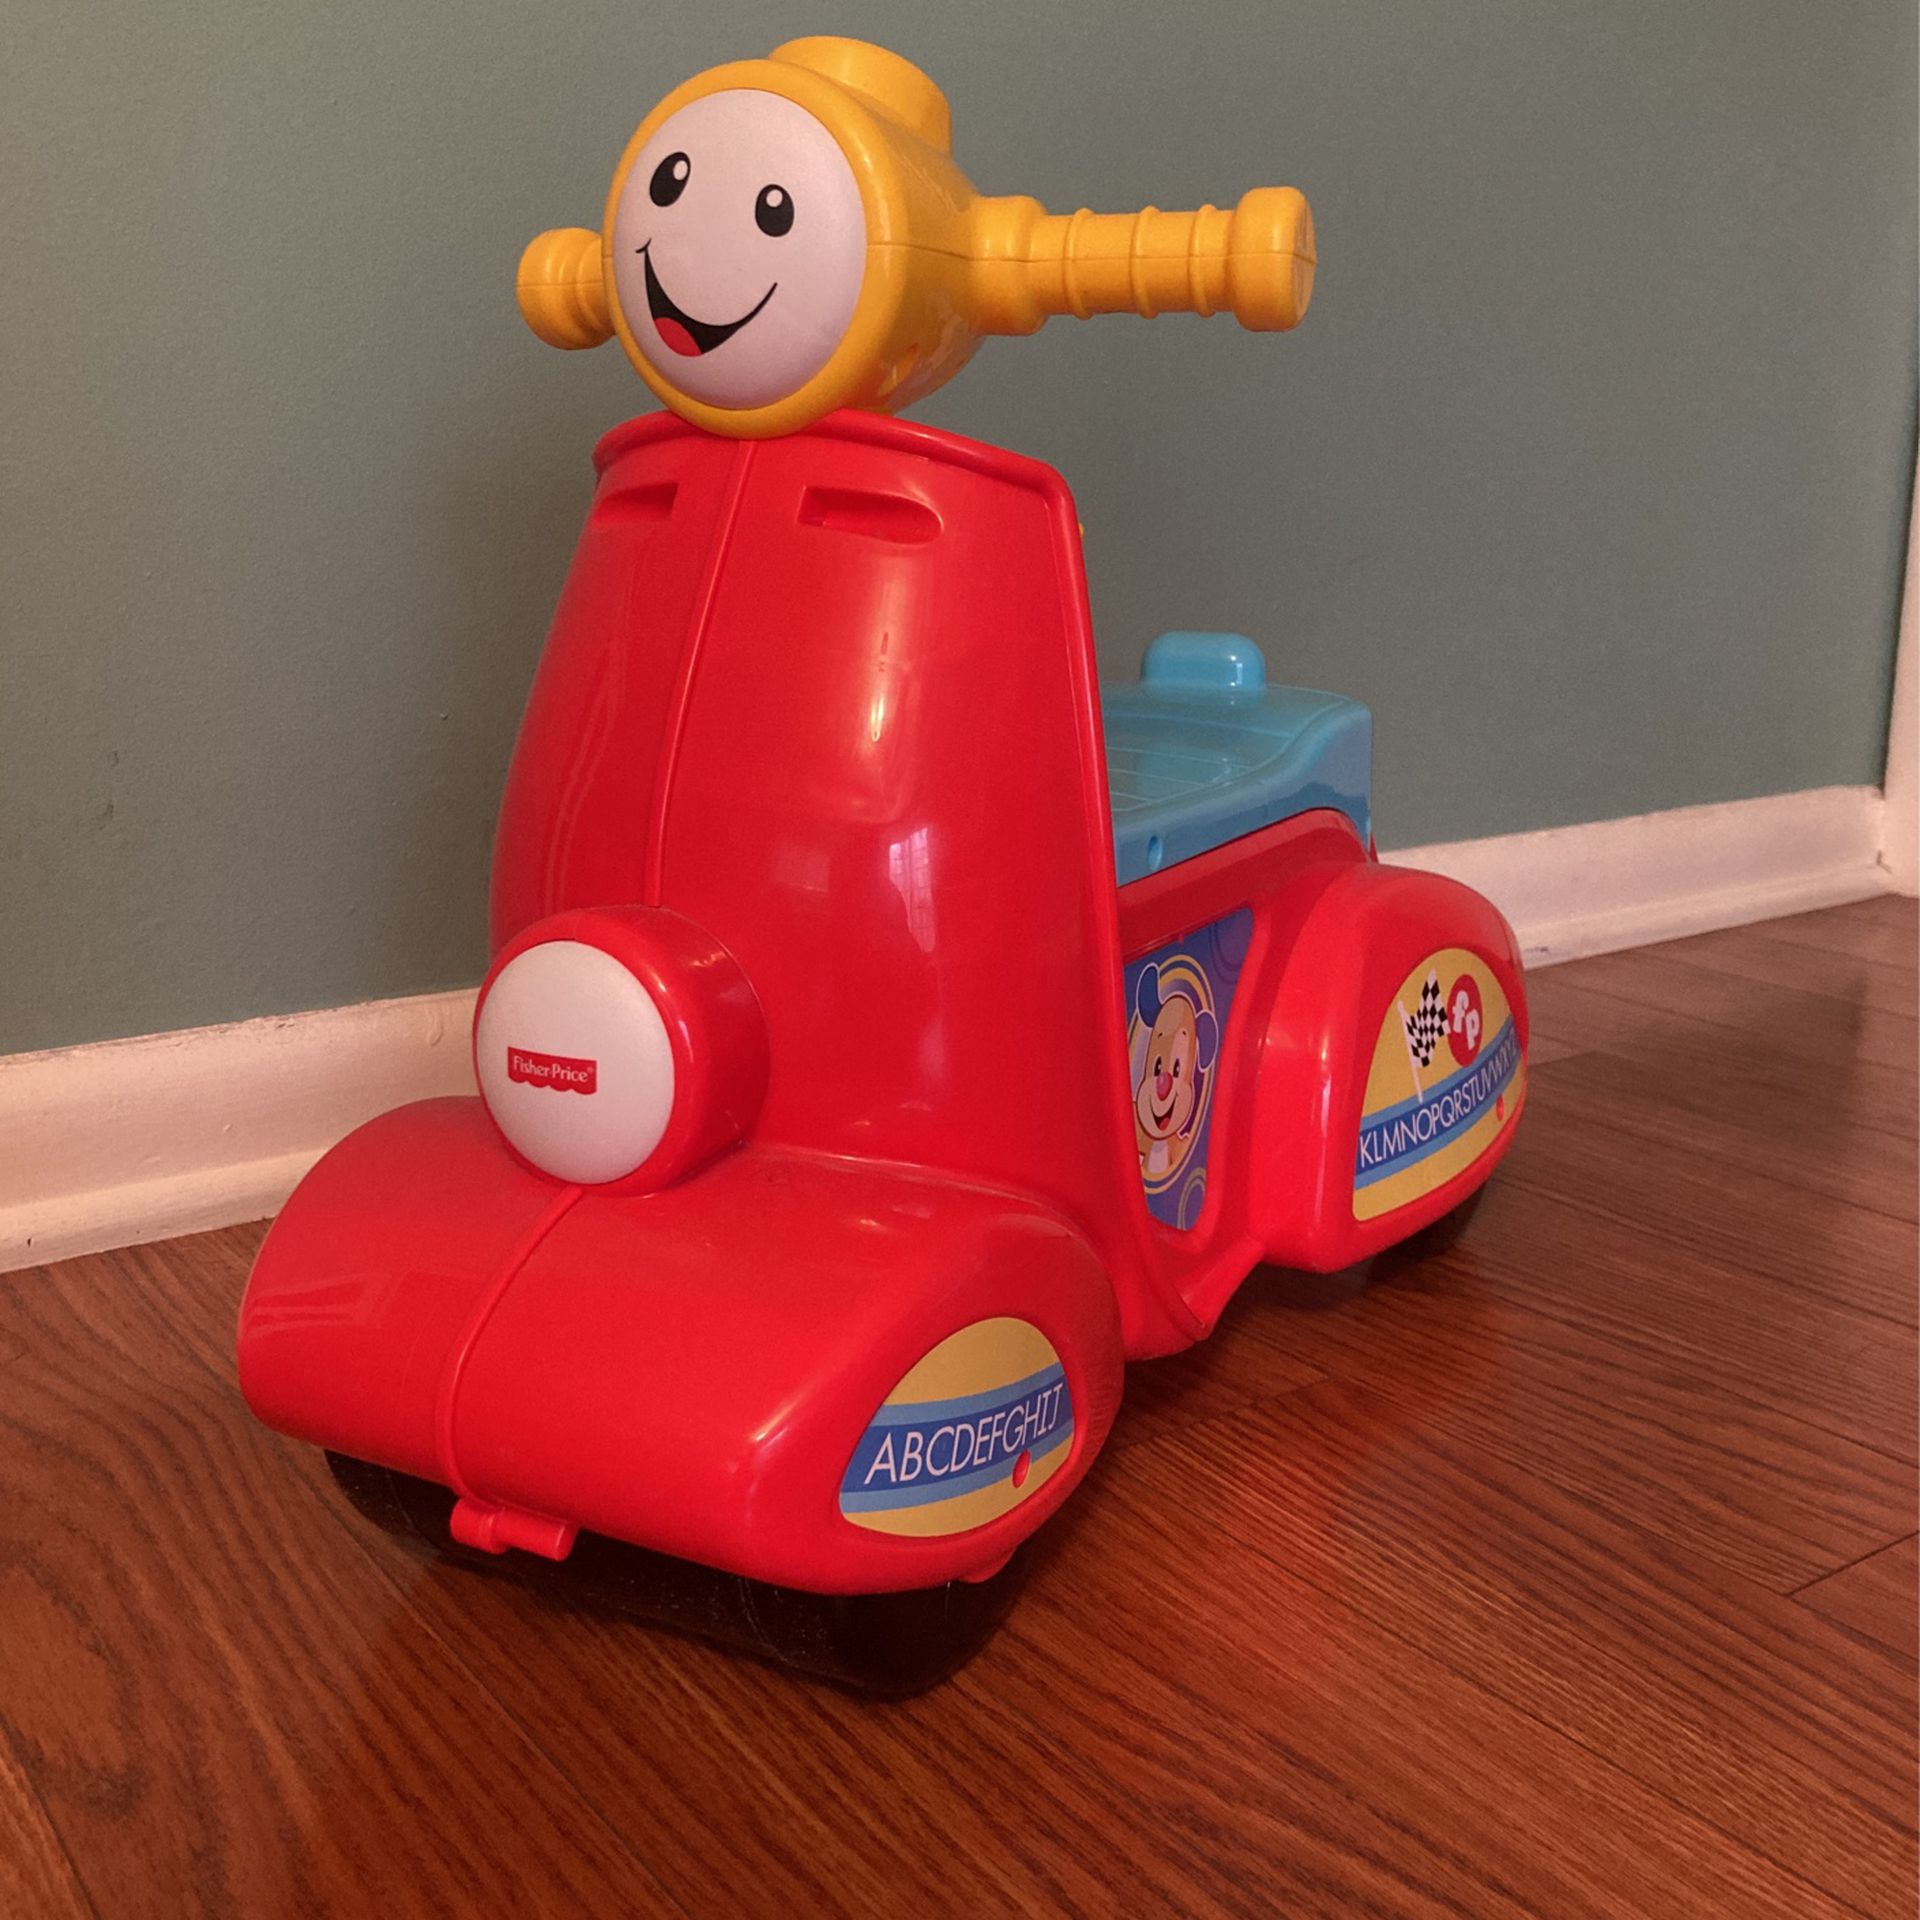 Fisher Price Scooter